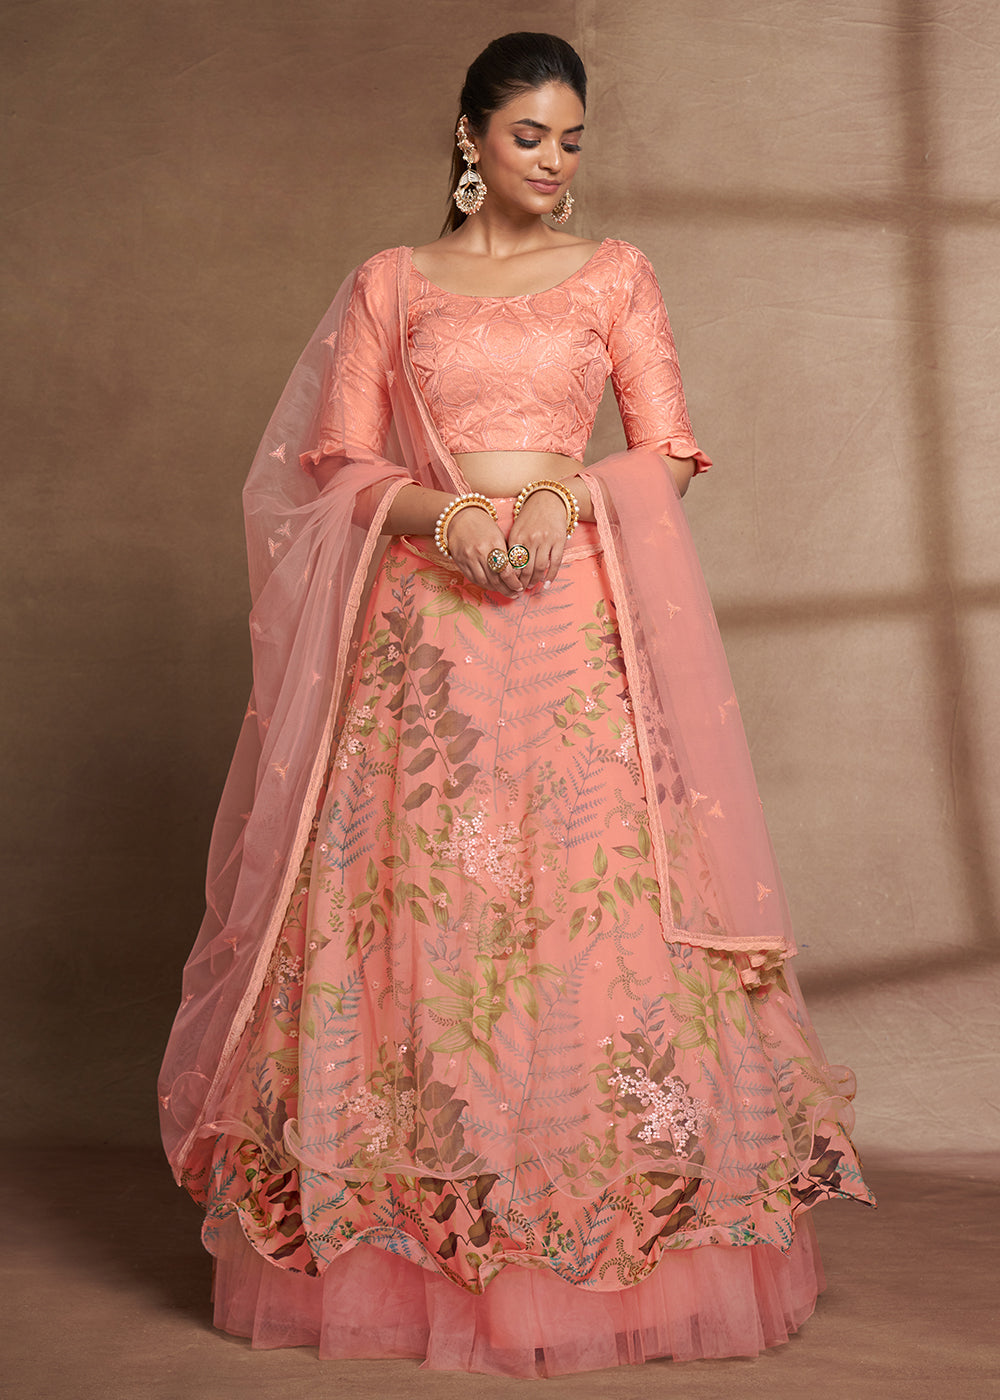 Buy Now Lovely Peach Floral Digital Printed & Embroidered Lehenga Choli Online in USA, UK, Canada & Worldwide at Empress Clothing. 